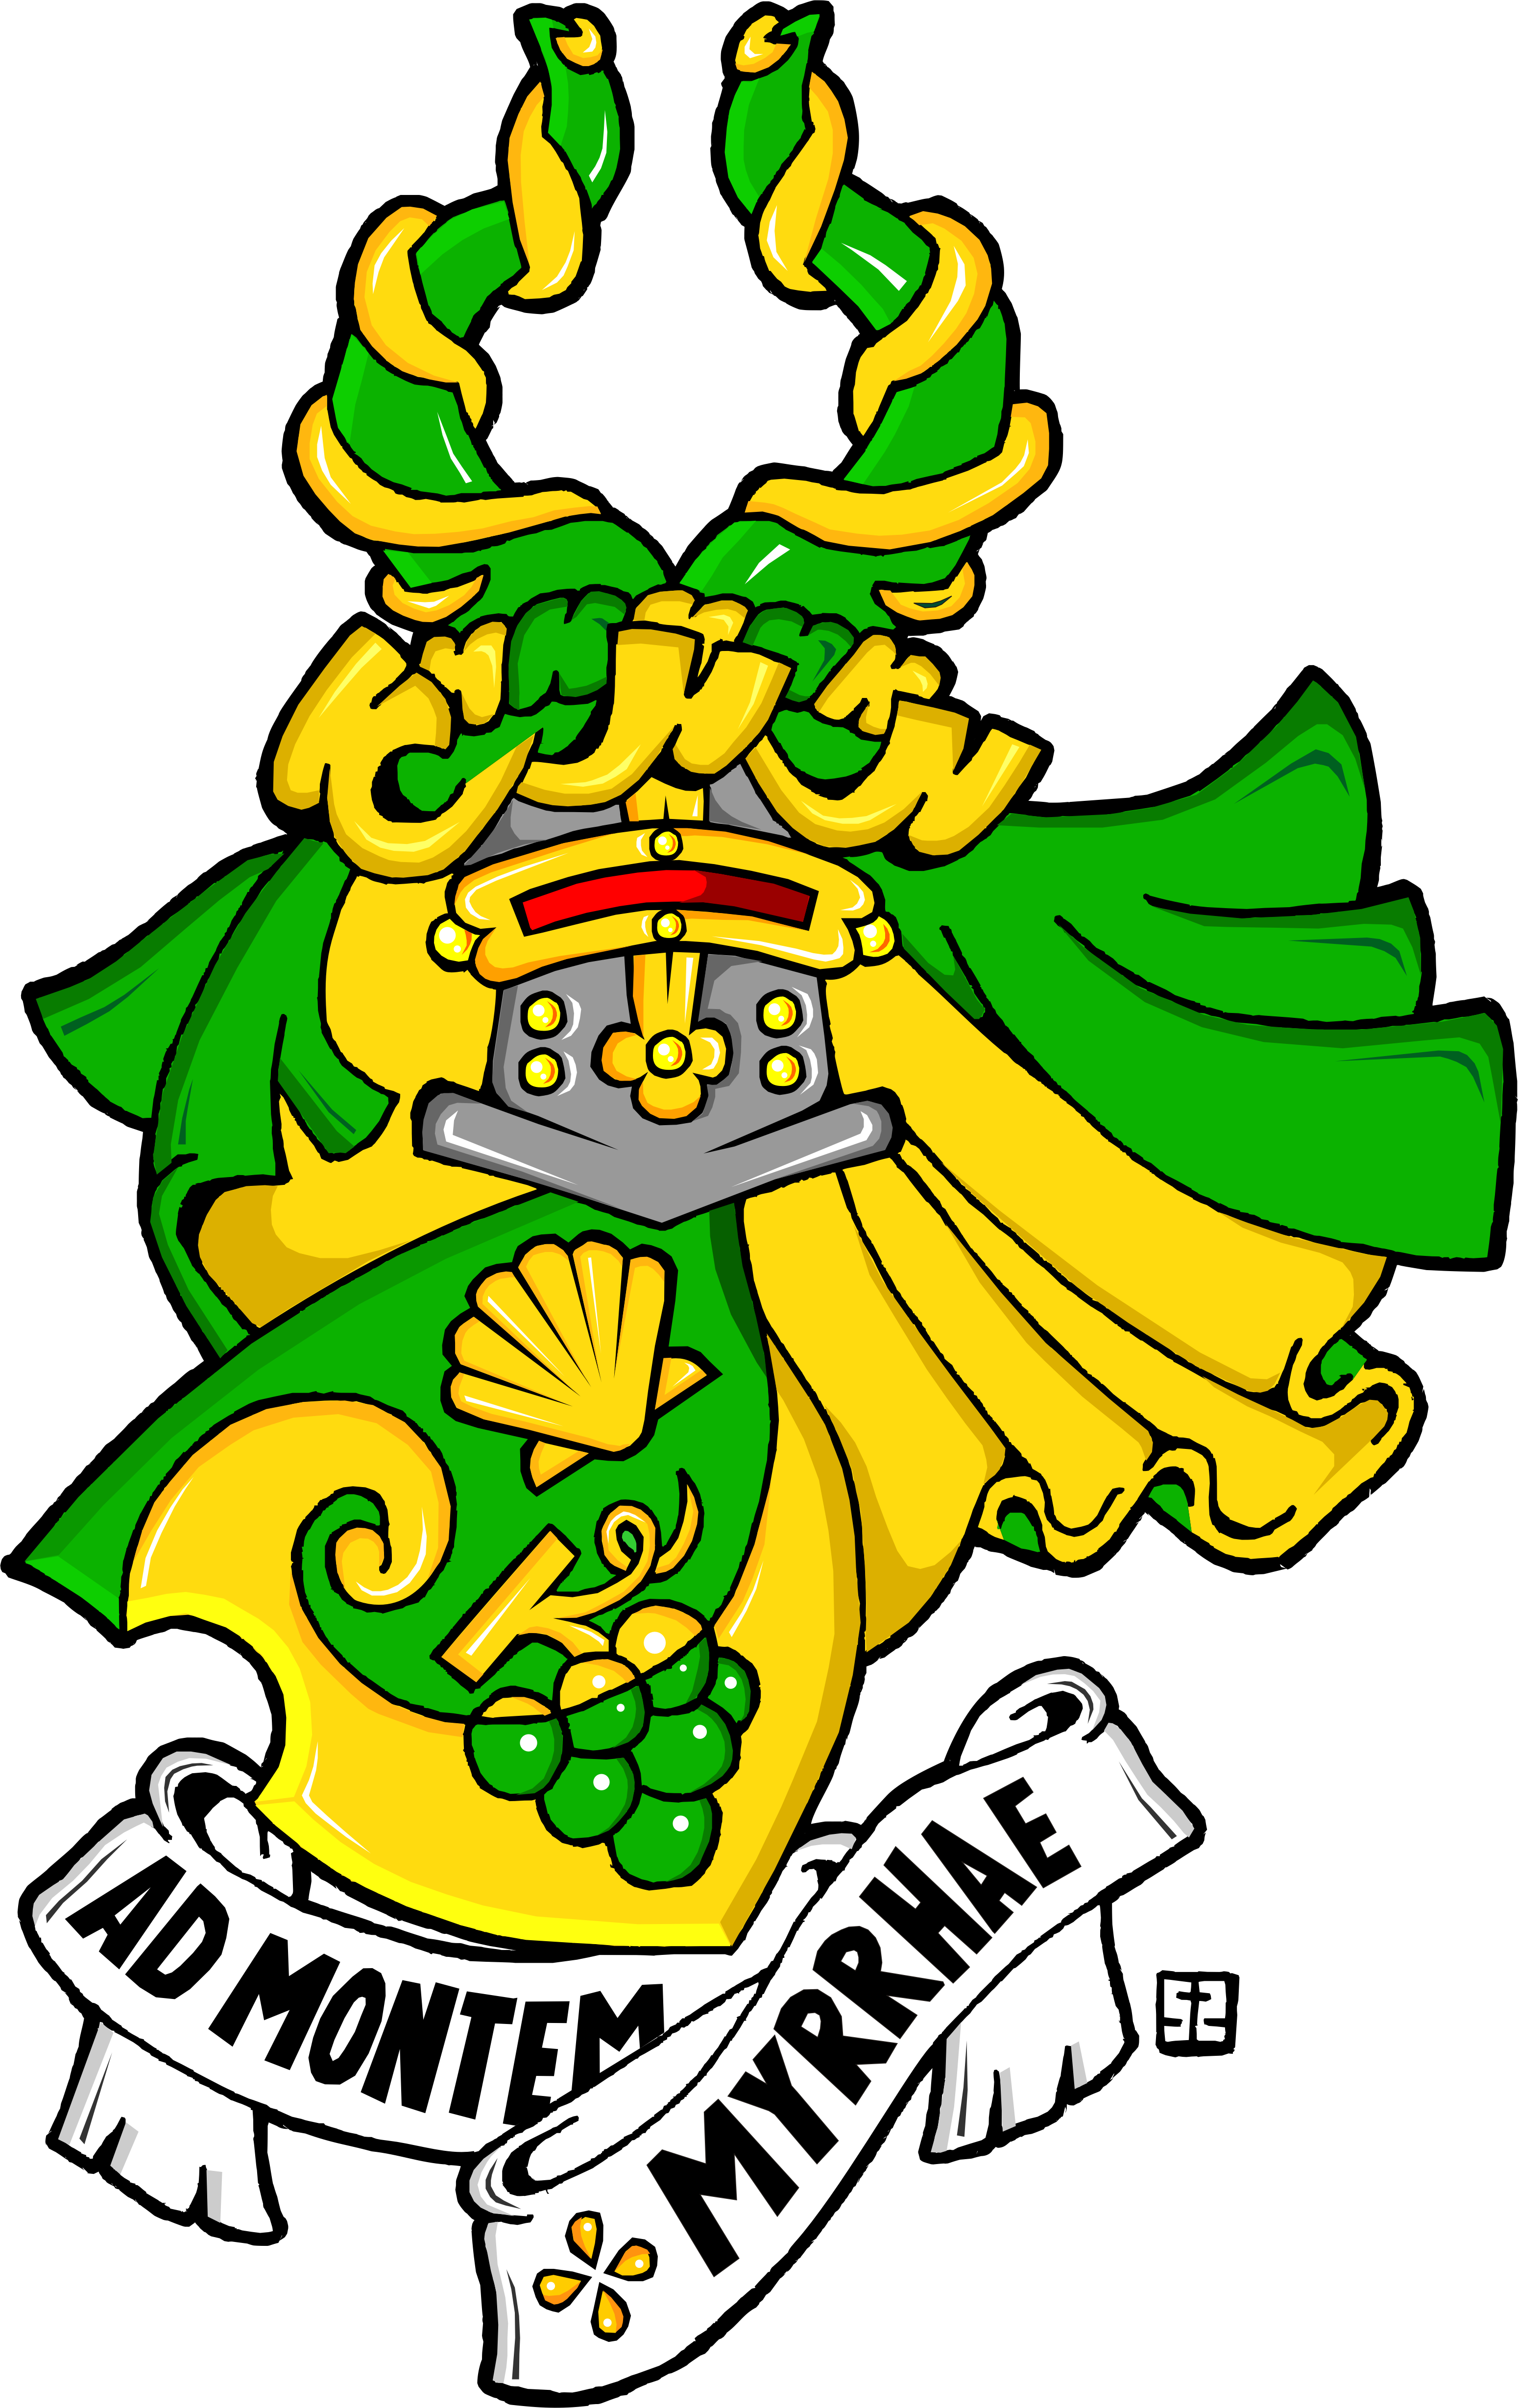 Kalter Coat of Arms by Sivane Saray 